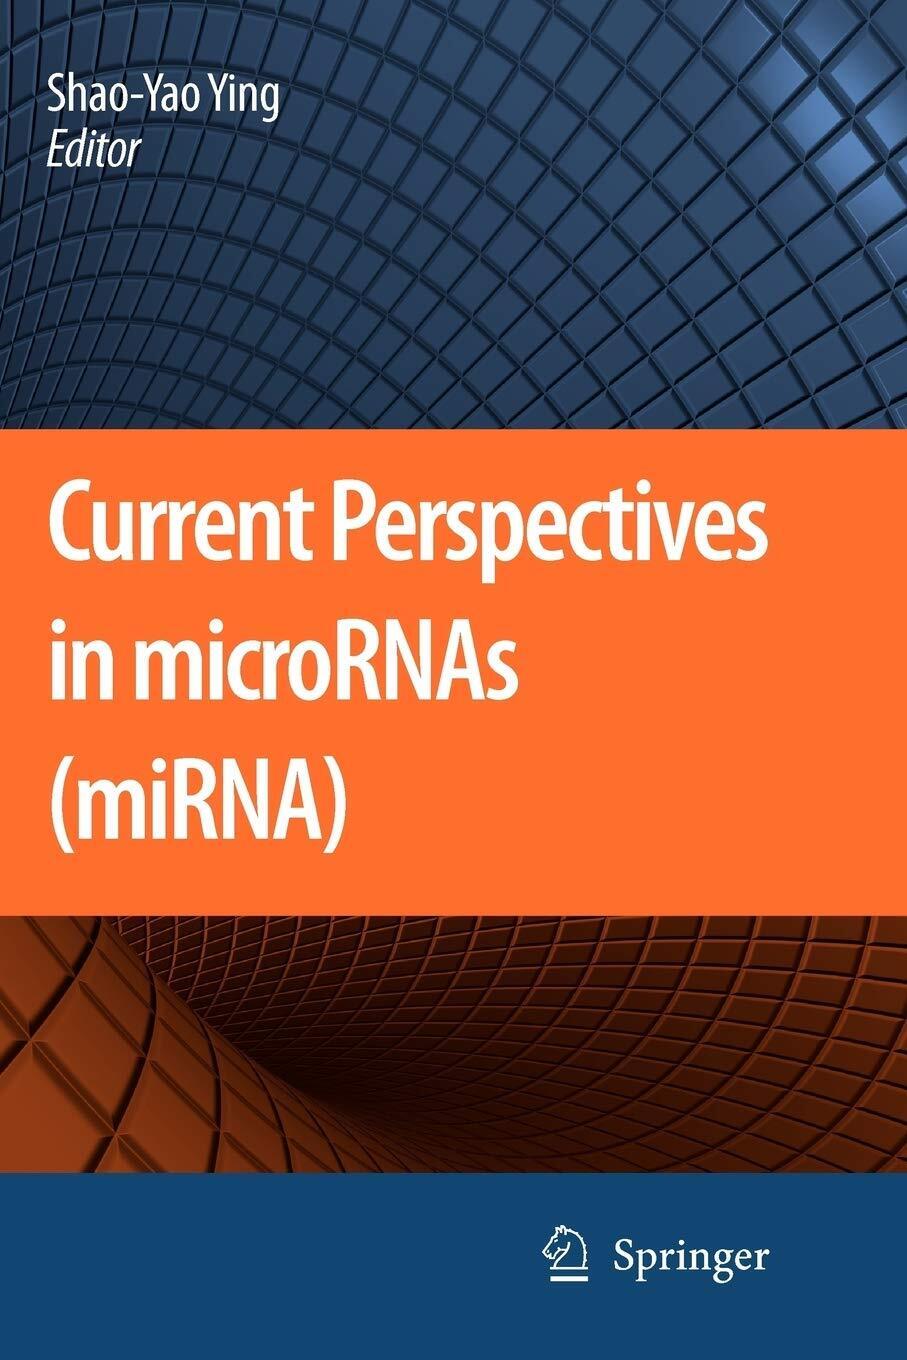 Current Perspectives in microRNAs (miRNA) - Shao-Yao Ying - Springer, 2010